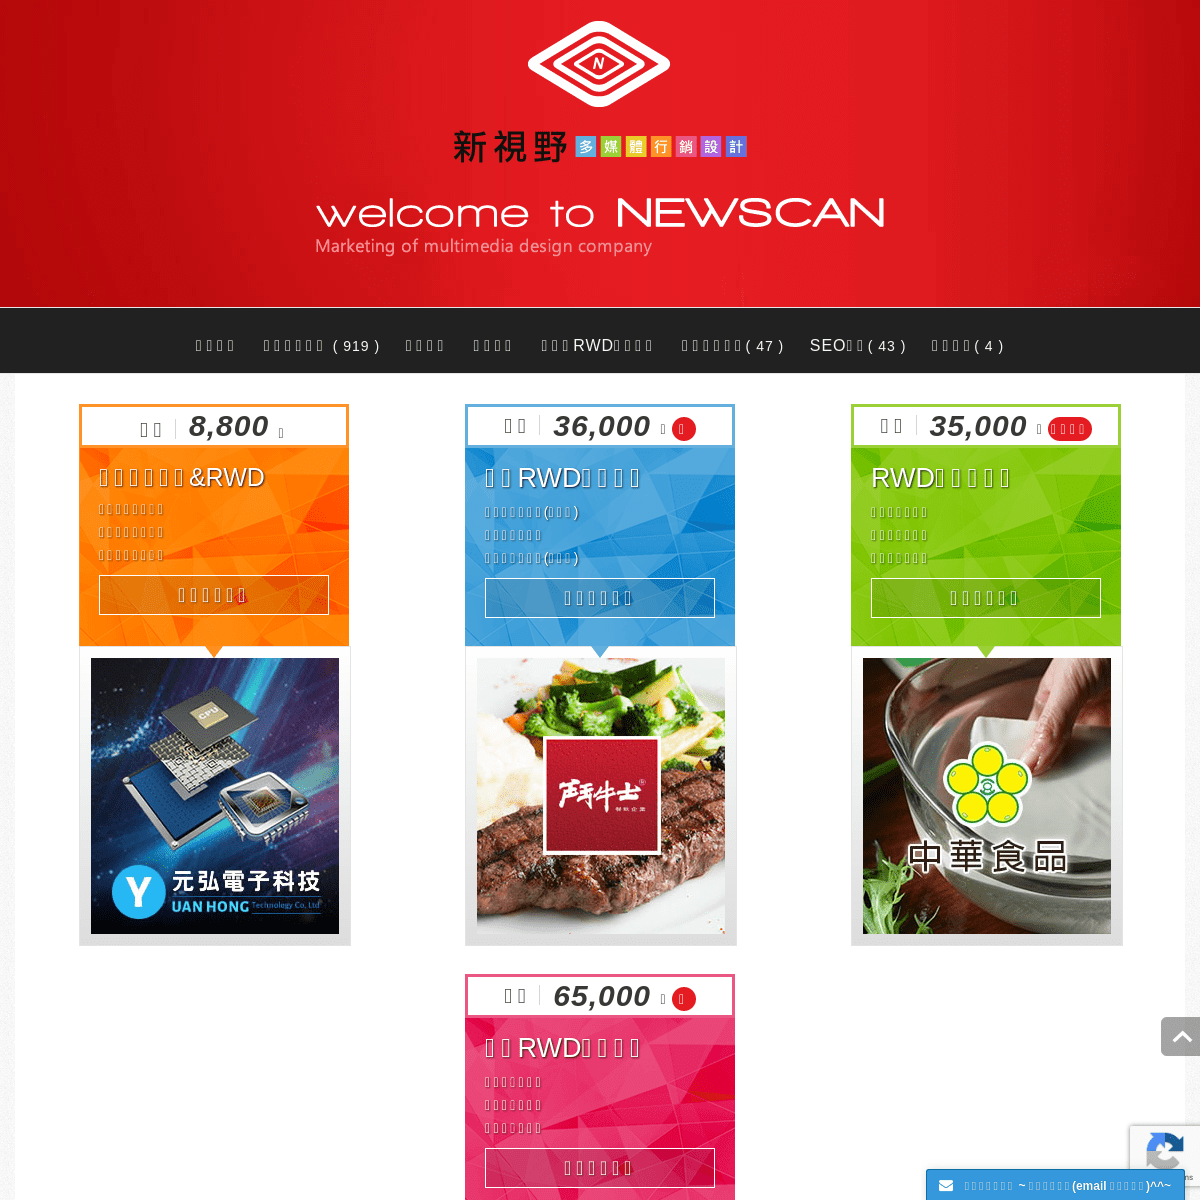 A complete backup of newscan.com.tw